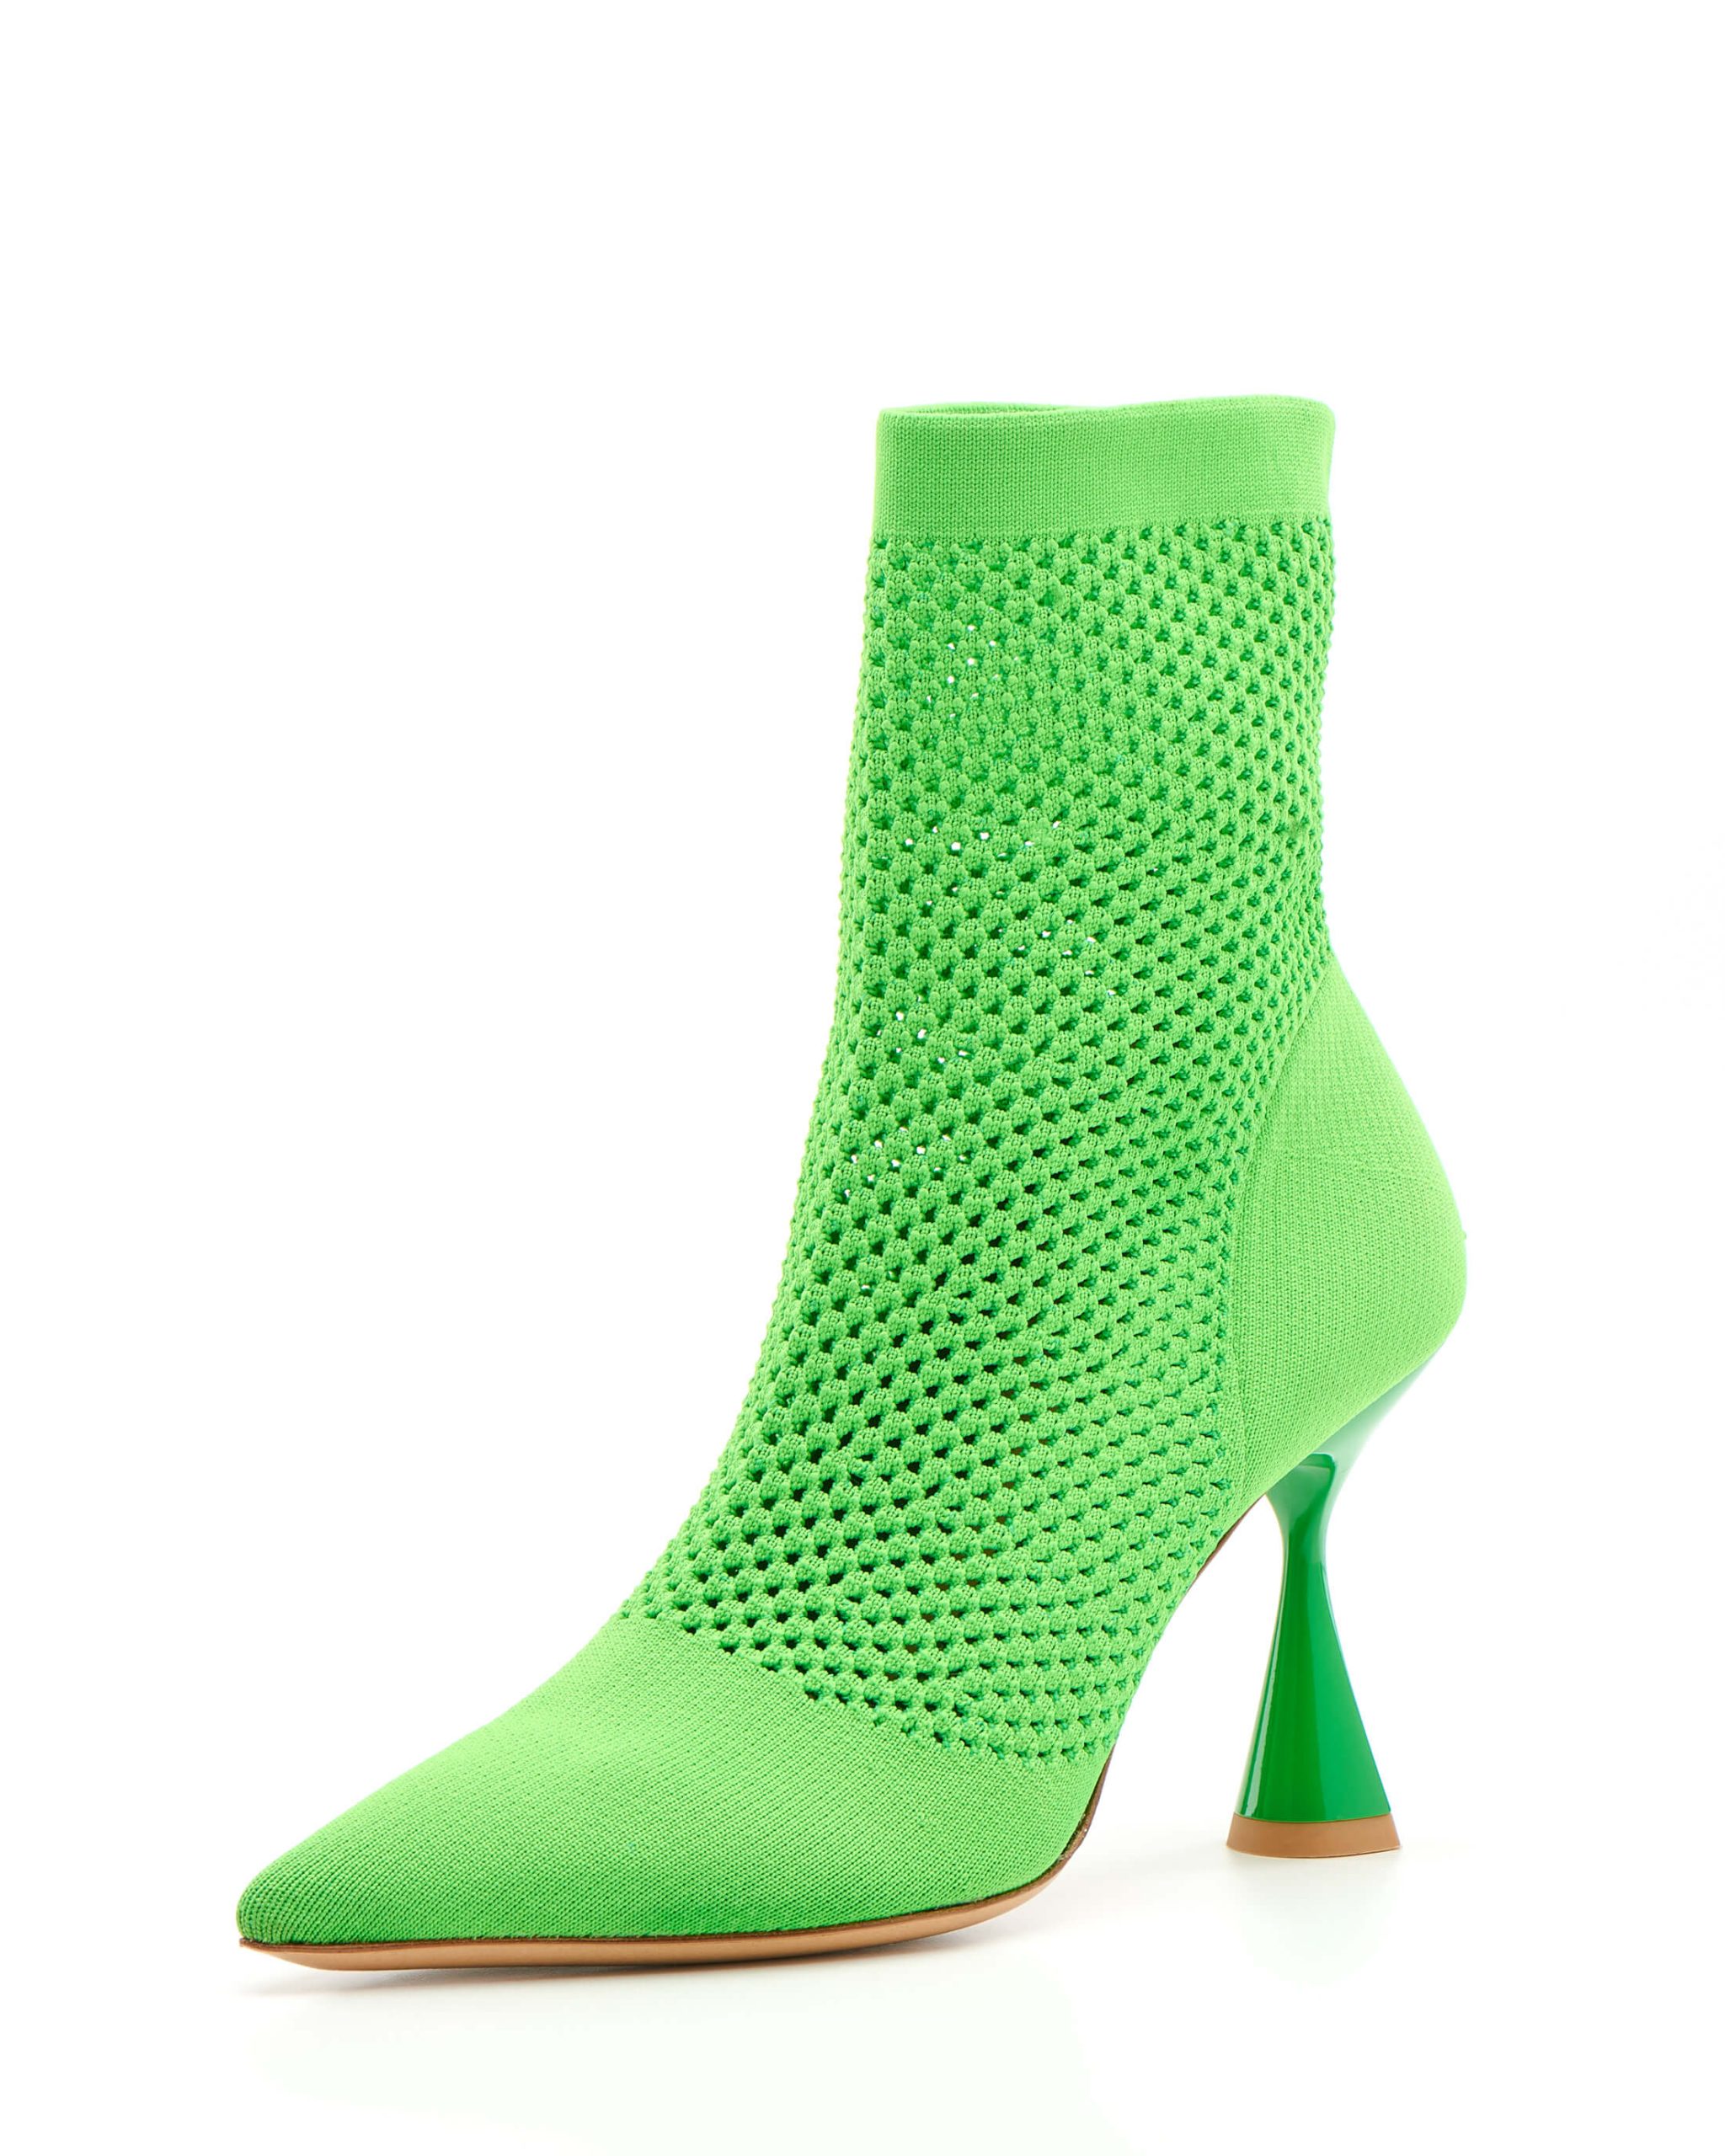 Luis Onofre Portuguese Shoes FW22 – 5307 – Furies Green-2